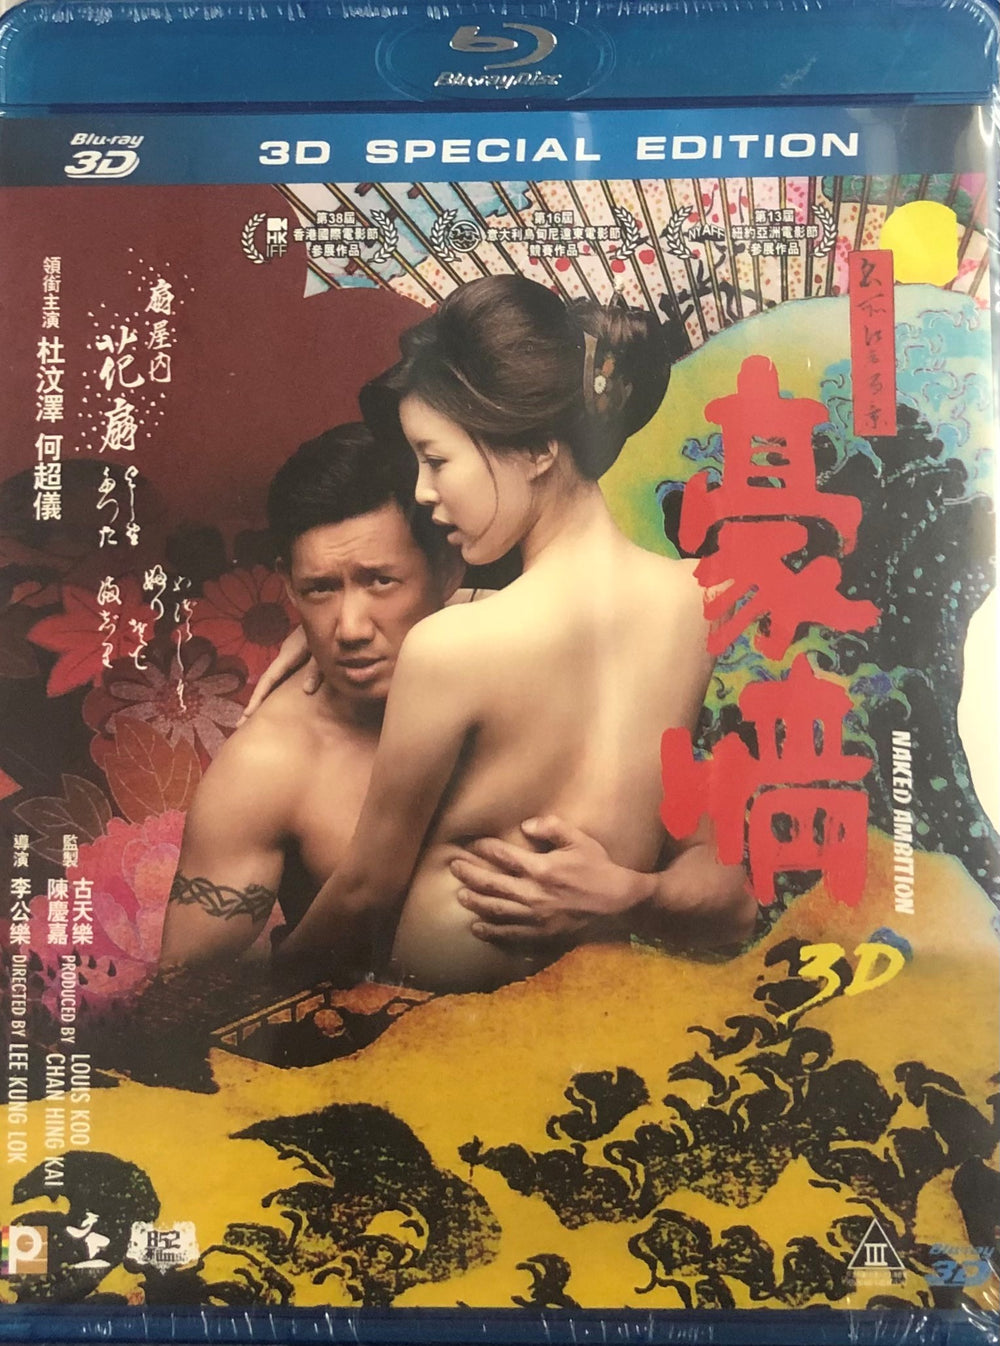 Naked Ambition 豪情 2014  (3D) (BLU-RAY) with English Subtitles (Region Free)